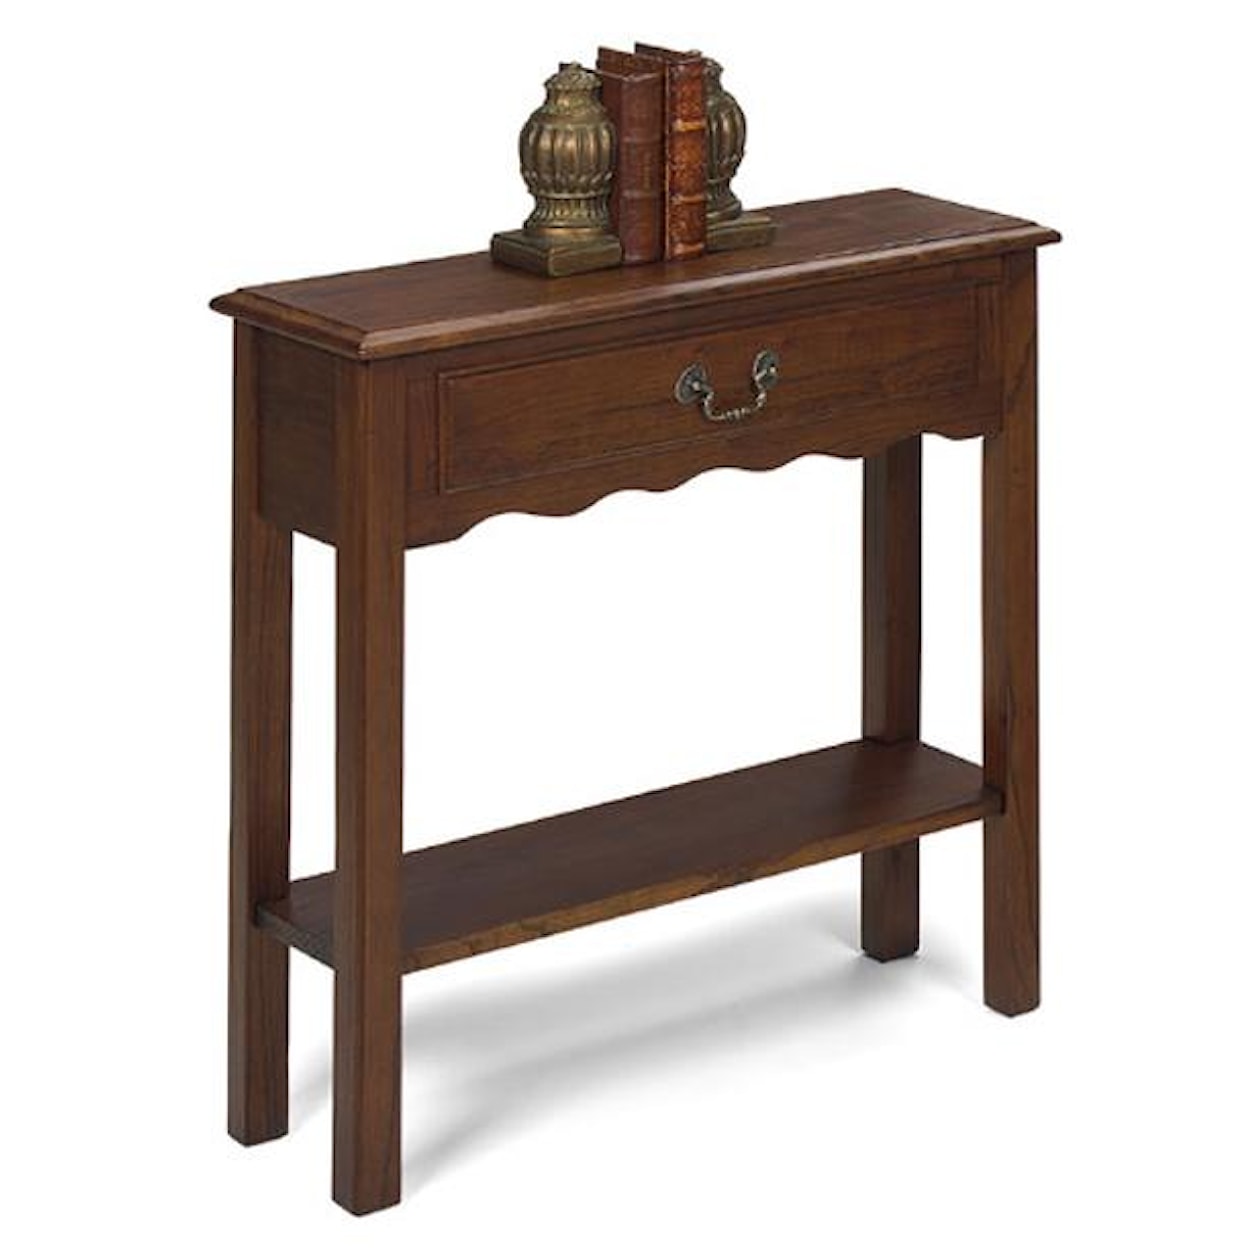 Null Furniture 1900 International Accents Petite Console Table